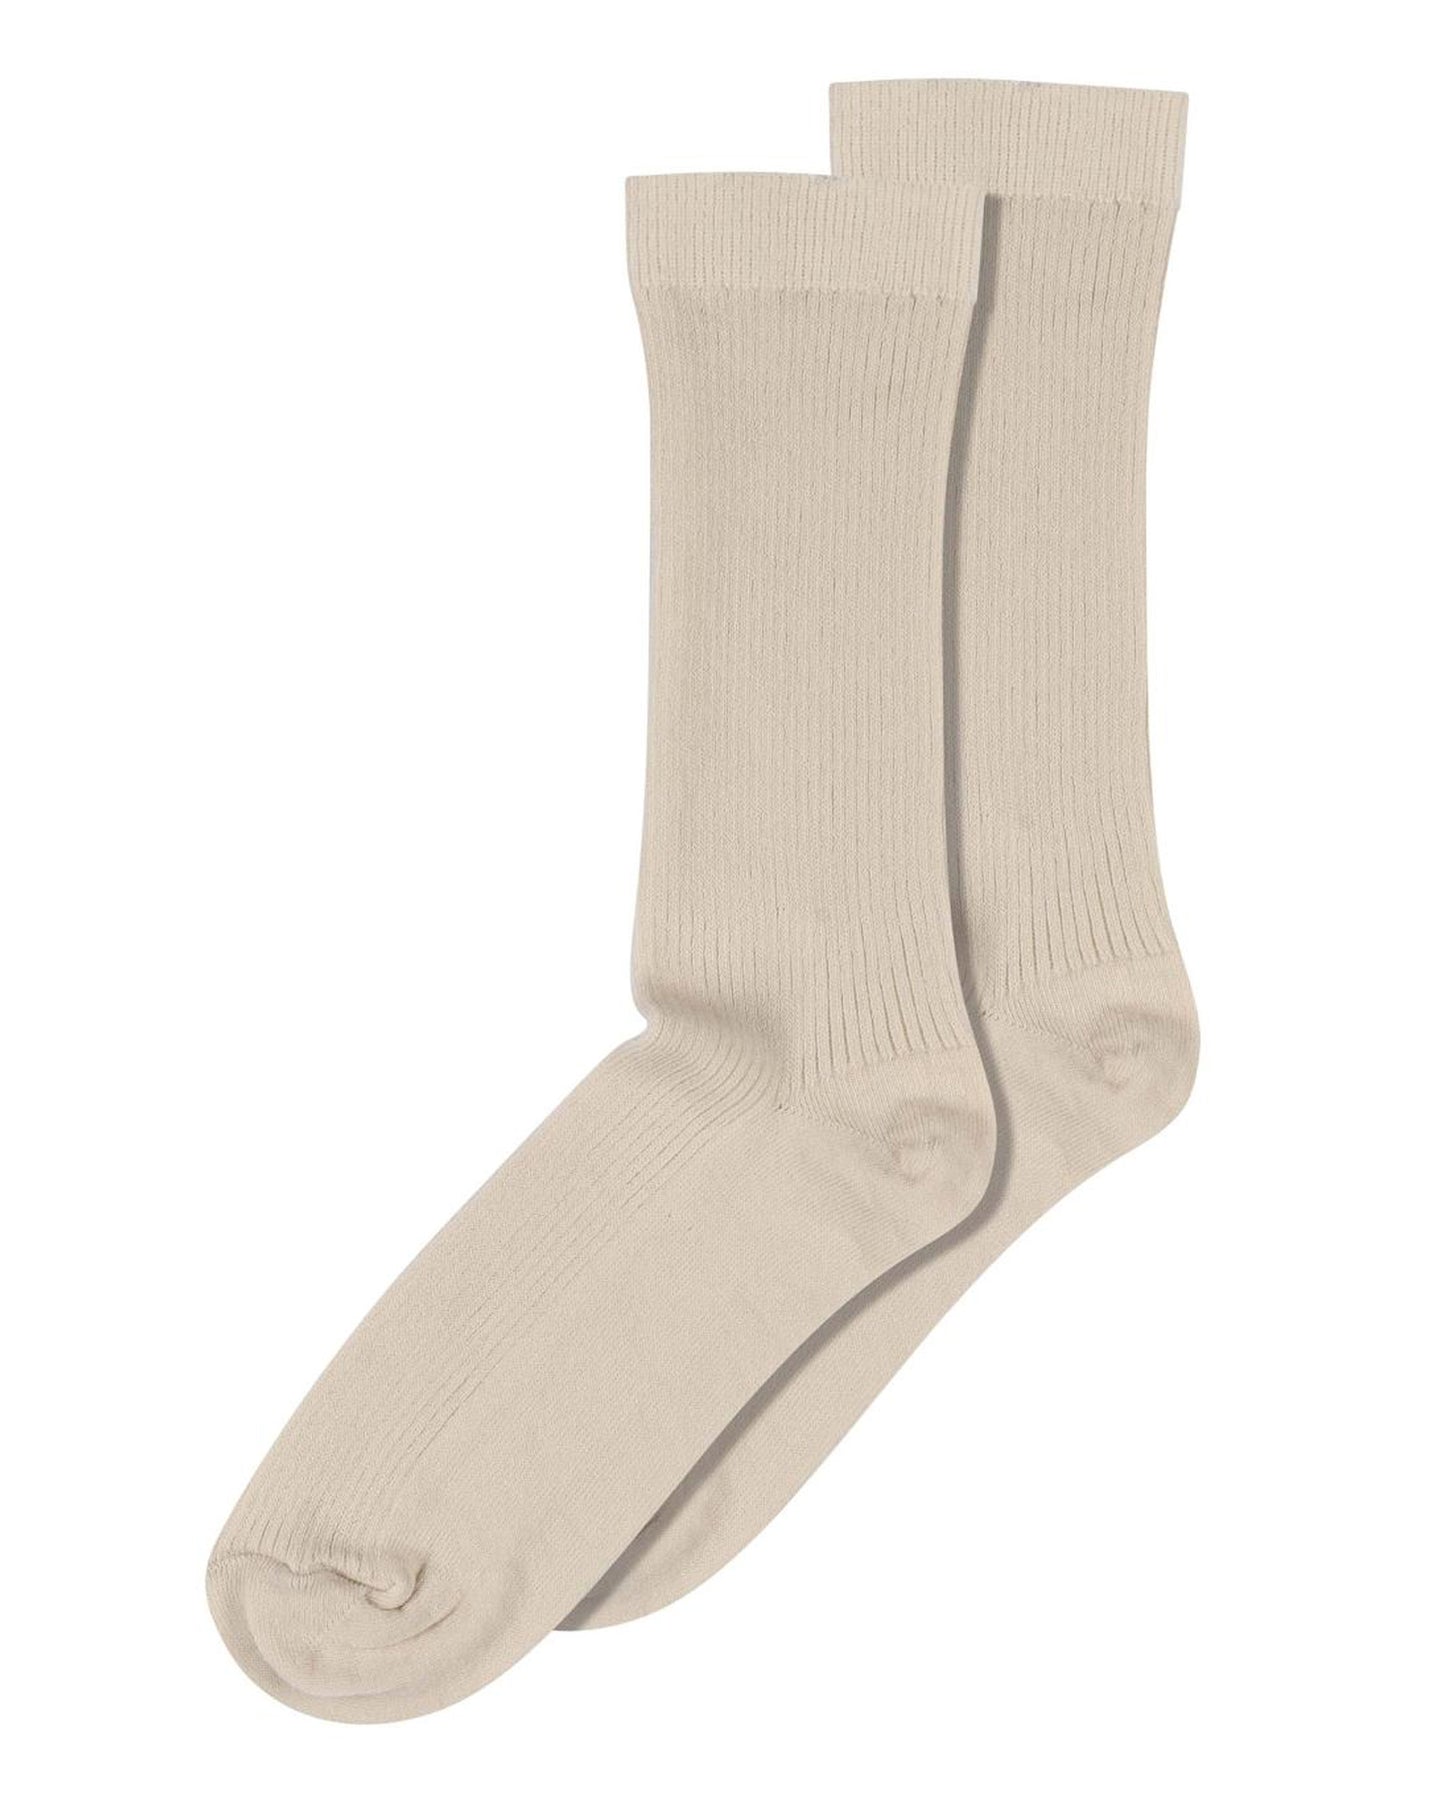 MP Denmark Fine Cotton Rib Sock - Soft and light beige ribbed cotton crew length ankle socks with plain cuff, plain sole, shaped heel and flat toe seam.